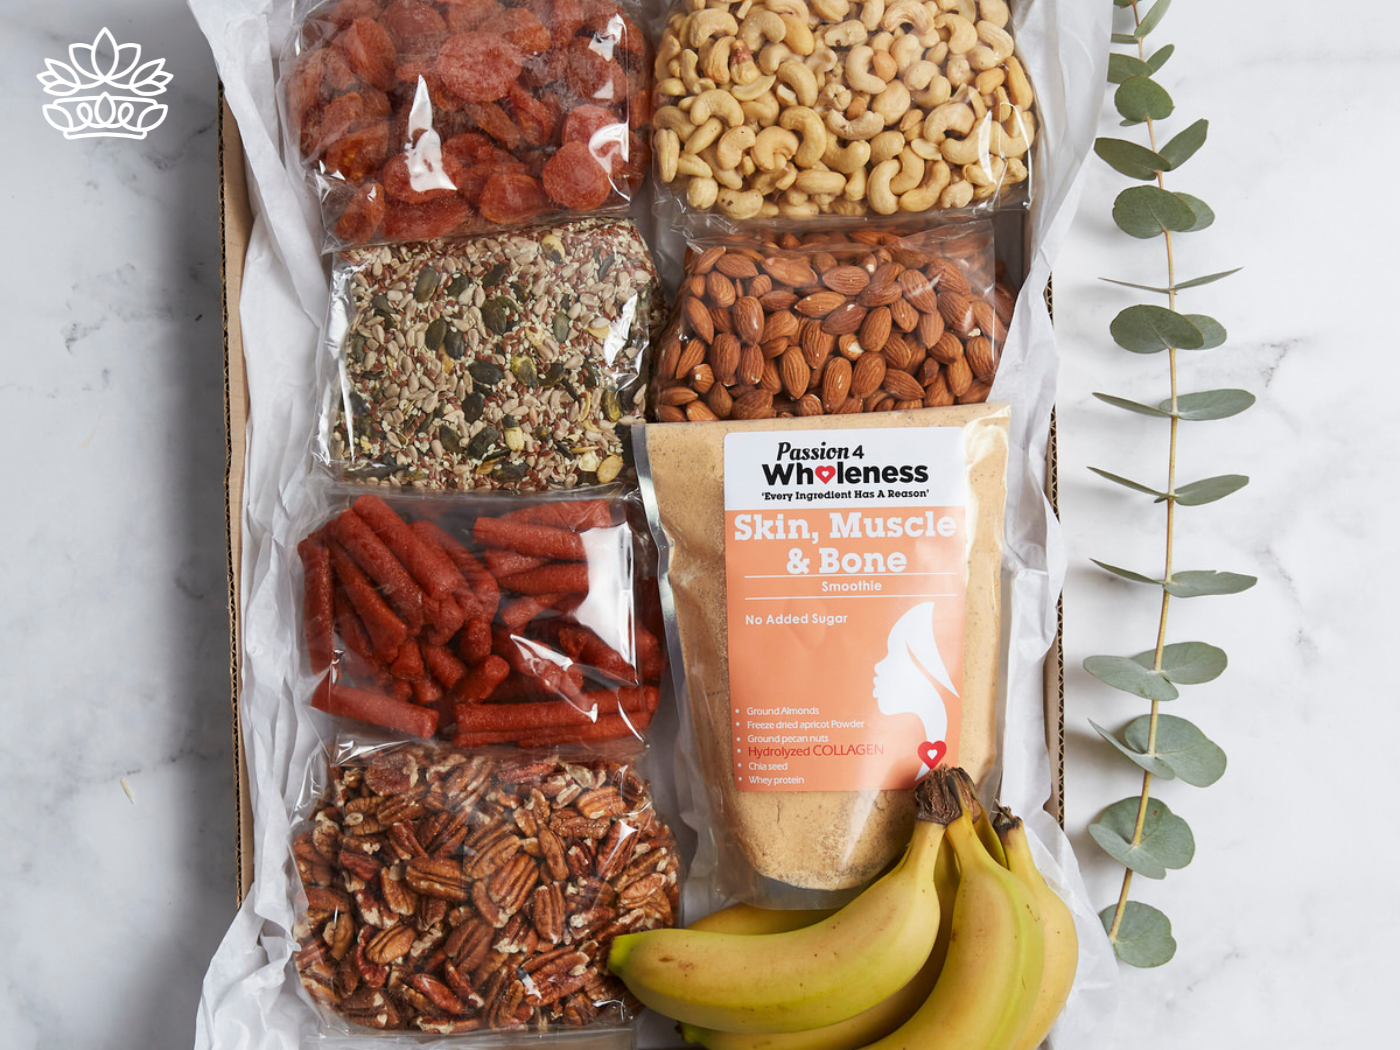 A selection of assorted snacks, including nuts, dried fruit, granola, bananas, and a smoothie mix, beautifully arranged in a gift box alongside eucalyptus leaves. Fabulous Flowers and Gifts. Gift Boxes for Boyfriend. Delivered with Heart.